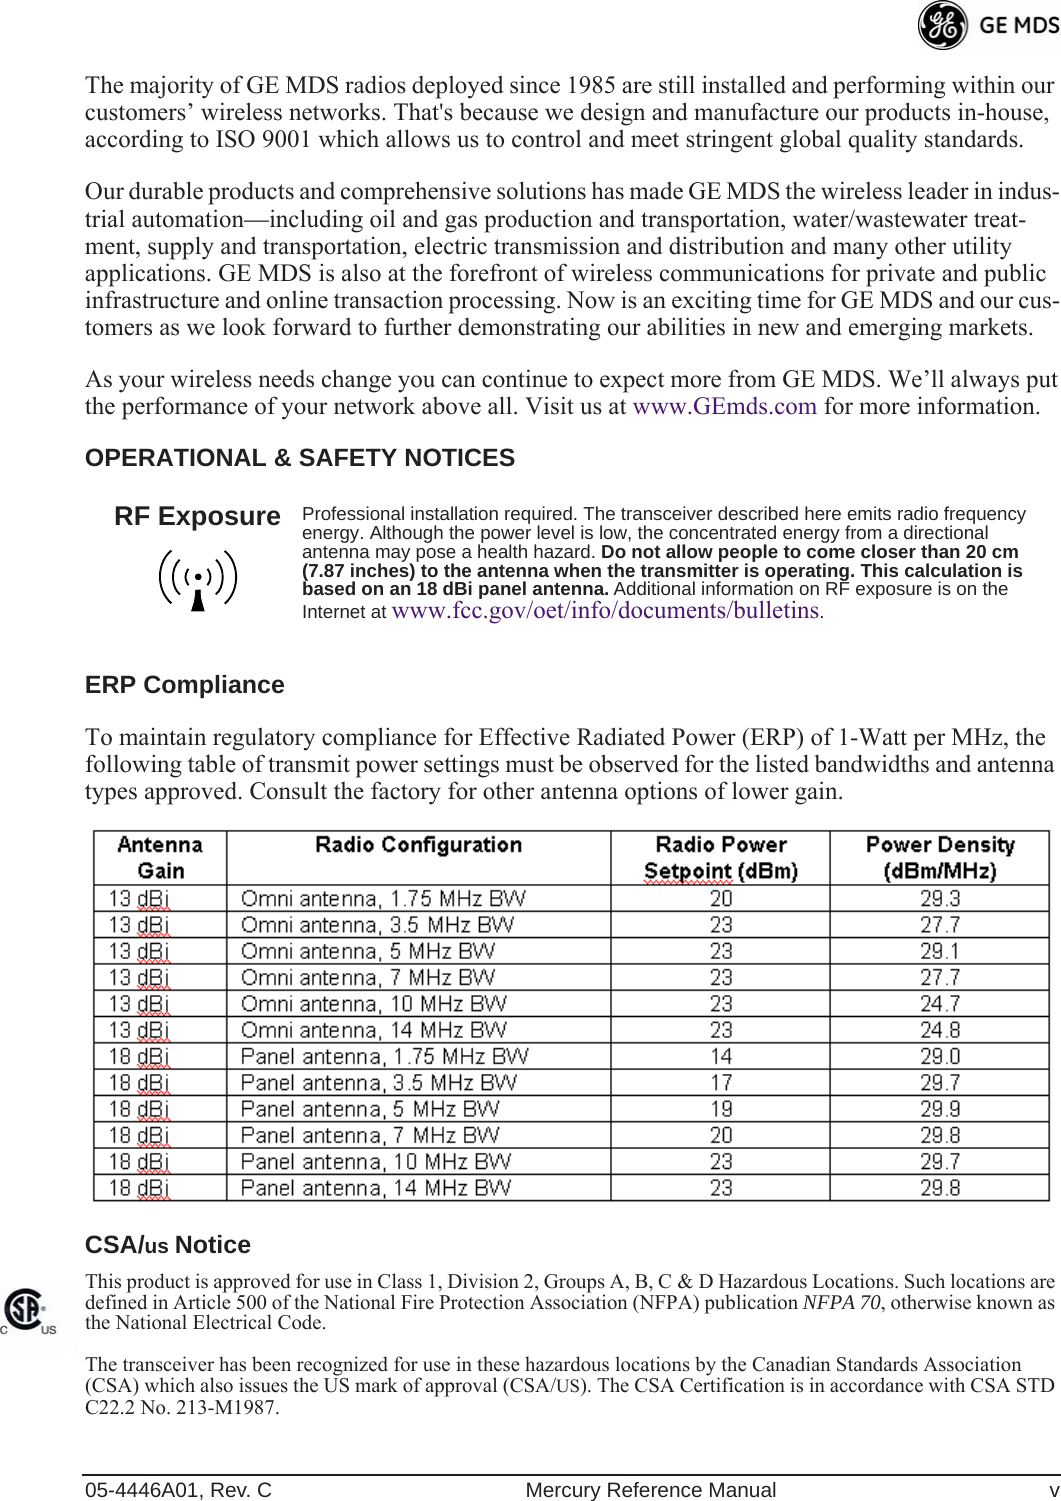  05-4446A01, Rev. C Mercury Reference Manual v The majority of GE MDS radios deployed since 1985 are still installed and performing within our customers’ wireless networks. That&apos;s because we design and manufacture our products in-house, according to ISO 9001 which allows us to control and meet stringent global quality standards. Our durable products and comprehensive solutions has made GE MDS the wireless leader in indus-trial automation—including oil and gas production and transportation, water/wastewater treat-ment, supply and transportation, electric transmission and distribution and many other utility applications. GE MDS is also at the forefront of wireless communications for private and public infrastructure and online transaction processing. Now is an exciting time for GE MDS and our cus-tomers as we look forward to further demonstrating our abilities in new and emerging markets.As your wireless needs change you can continue to expect more from GE MDS. We’ll always put the performance of your network above all. Visit us at www.GEmds.com for more information. OPERATIONAL &amp; SAFETY NOTICESERP Compliance To maintain regulatory compliance for Effective Radiated Power (ERP) of 1-Watt per MHz, the following table of transmit power settings must be observed for the listed bandwidths and antenna types approved. Consult the factory for other antenna options of lower gain. CSA/ us  Notice This product is approved for use in Class 1, Division 2, Groups A, B, C &amp; D Hazardous Locations. Such locations are defined in Article 500 of the National Fire Protection Association (NFPA) publication  NFPA 70 , otherwise known as the National Electrical Code. The transceiver has been recognized for use in these hazardous locations by the Canadian Standards Association (CSA) which also issues the US mark of approval (CSA/ US ). The CSA Certification is in accordance with CSA STD C22.2 No. 213-M1987.  Professional installation required. The transceiver described here emits radio frequency energy. Although the power level is low, the concentrated energy from a directional antenna may pose a health hazard.  Do not allow people to come closer than 20 cm (7.87 inches) to the antenna when the transmitter is operating. This calculation is based on an 18 dBi panel antenna.  Additional information on RF exposure is on the Internet at  www.fcc.gov/oet/info/documents/bulletins .RF Exposure